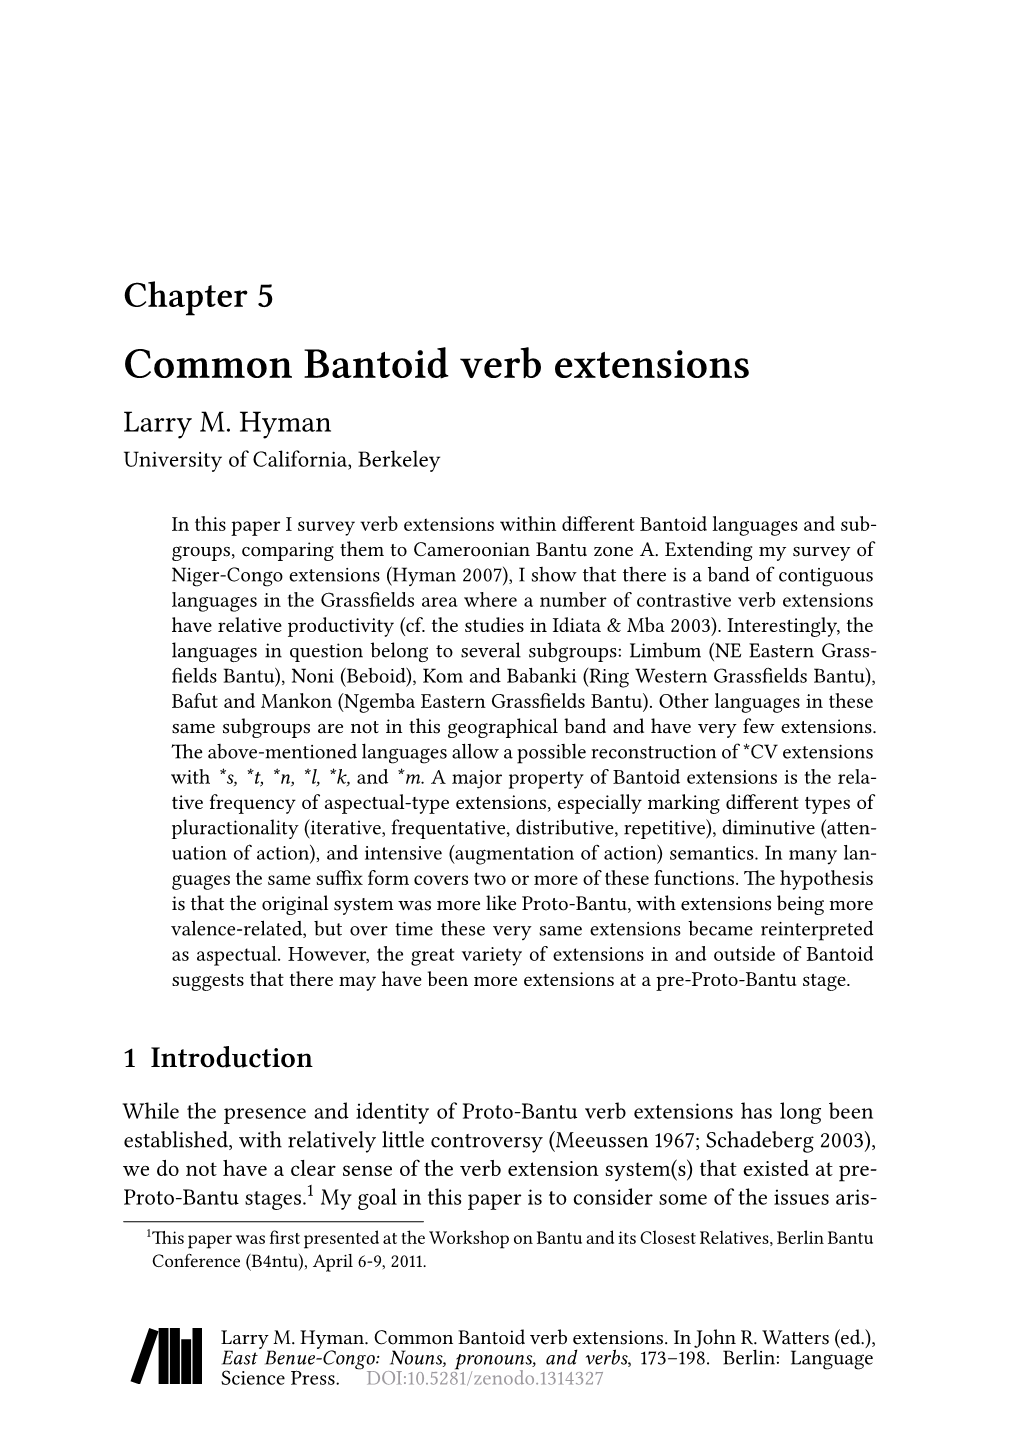 Chapter 5 Common Bantoid Verb Extensions Larry M